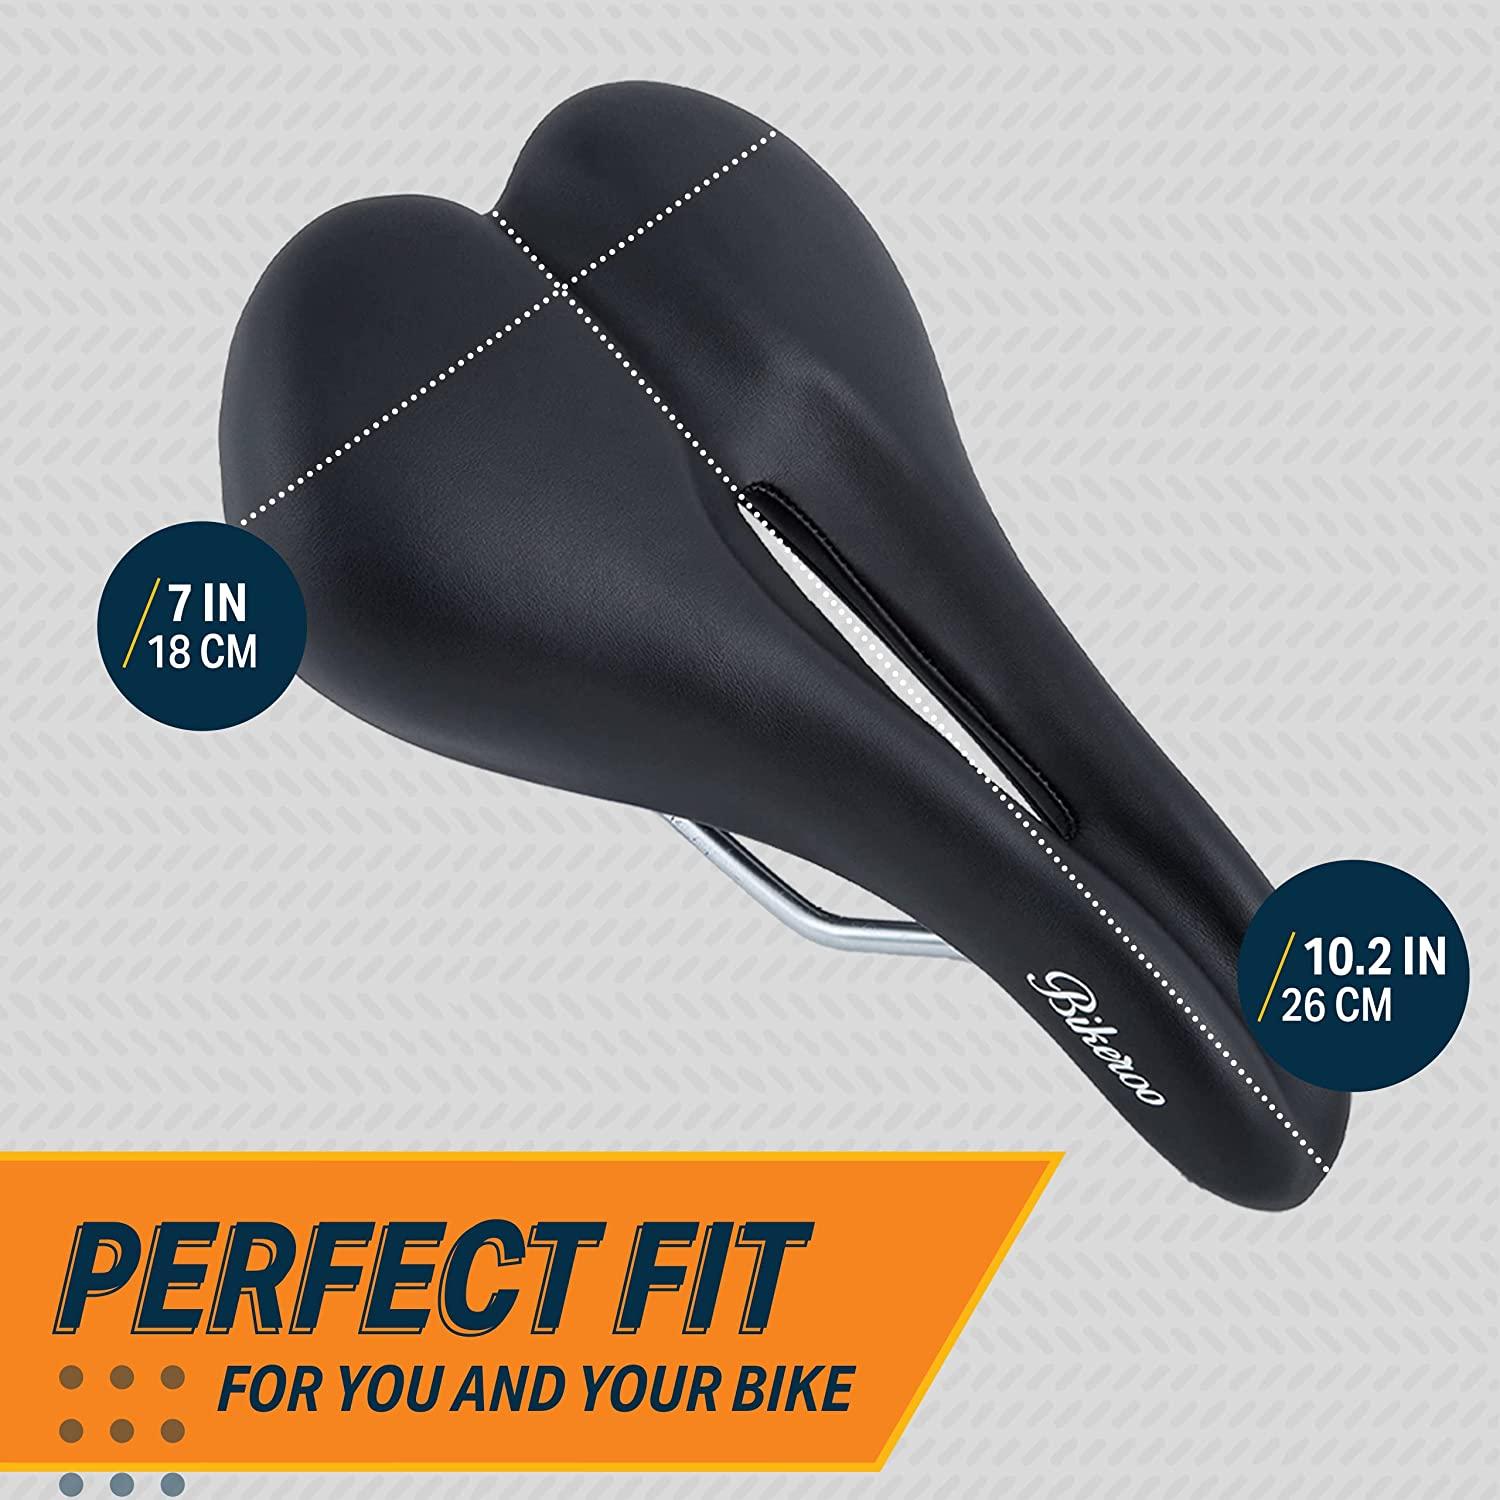 The Bikeroo Oversized Bike Seat is the most COMFORTABLE bicycle